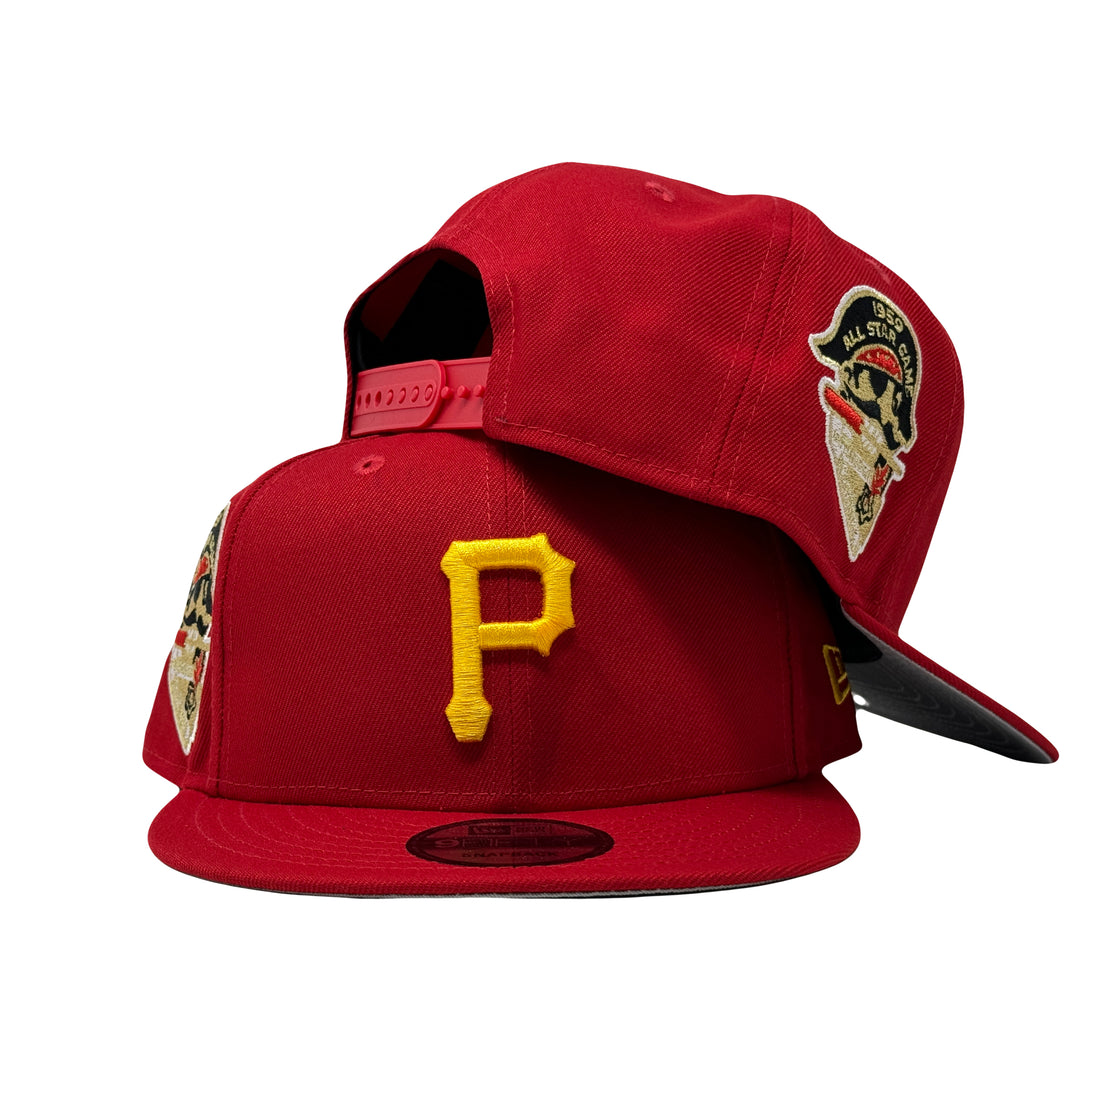 Pittsburgh Pirates 1959 All Star Game Red 9Fifty New Era Snapback Hat